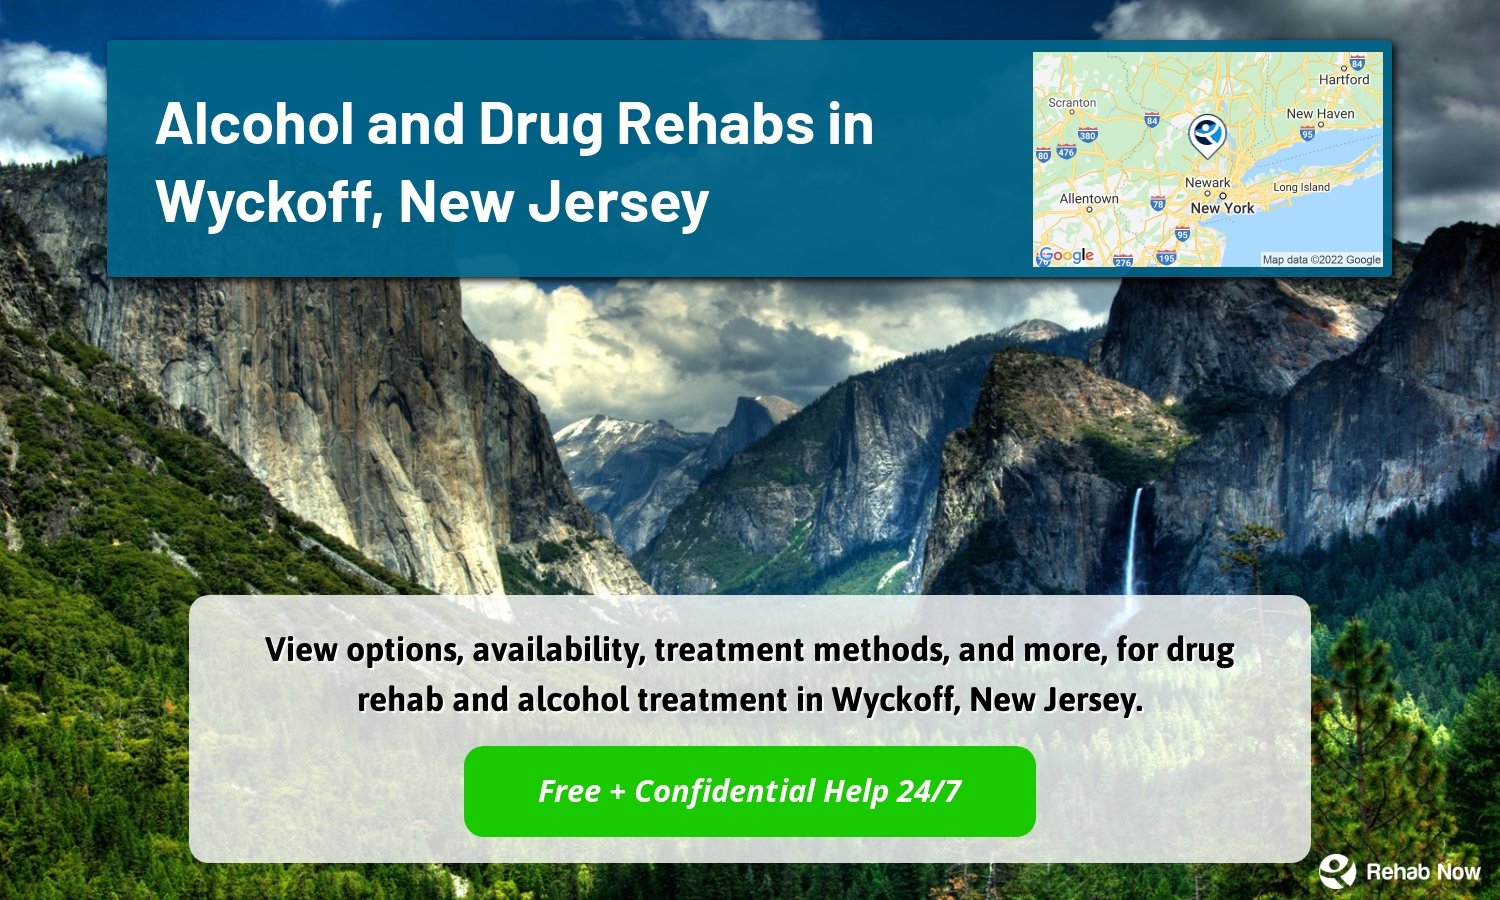 View options, availability, treatment methods, and more, for drug rehab and alcohol treatment in Wyckoff, New Jersey.